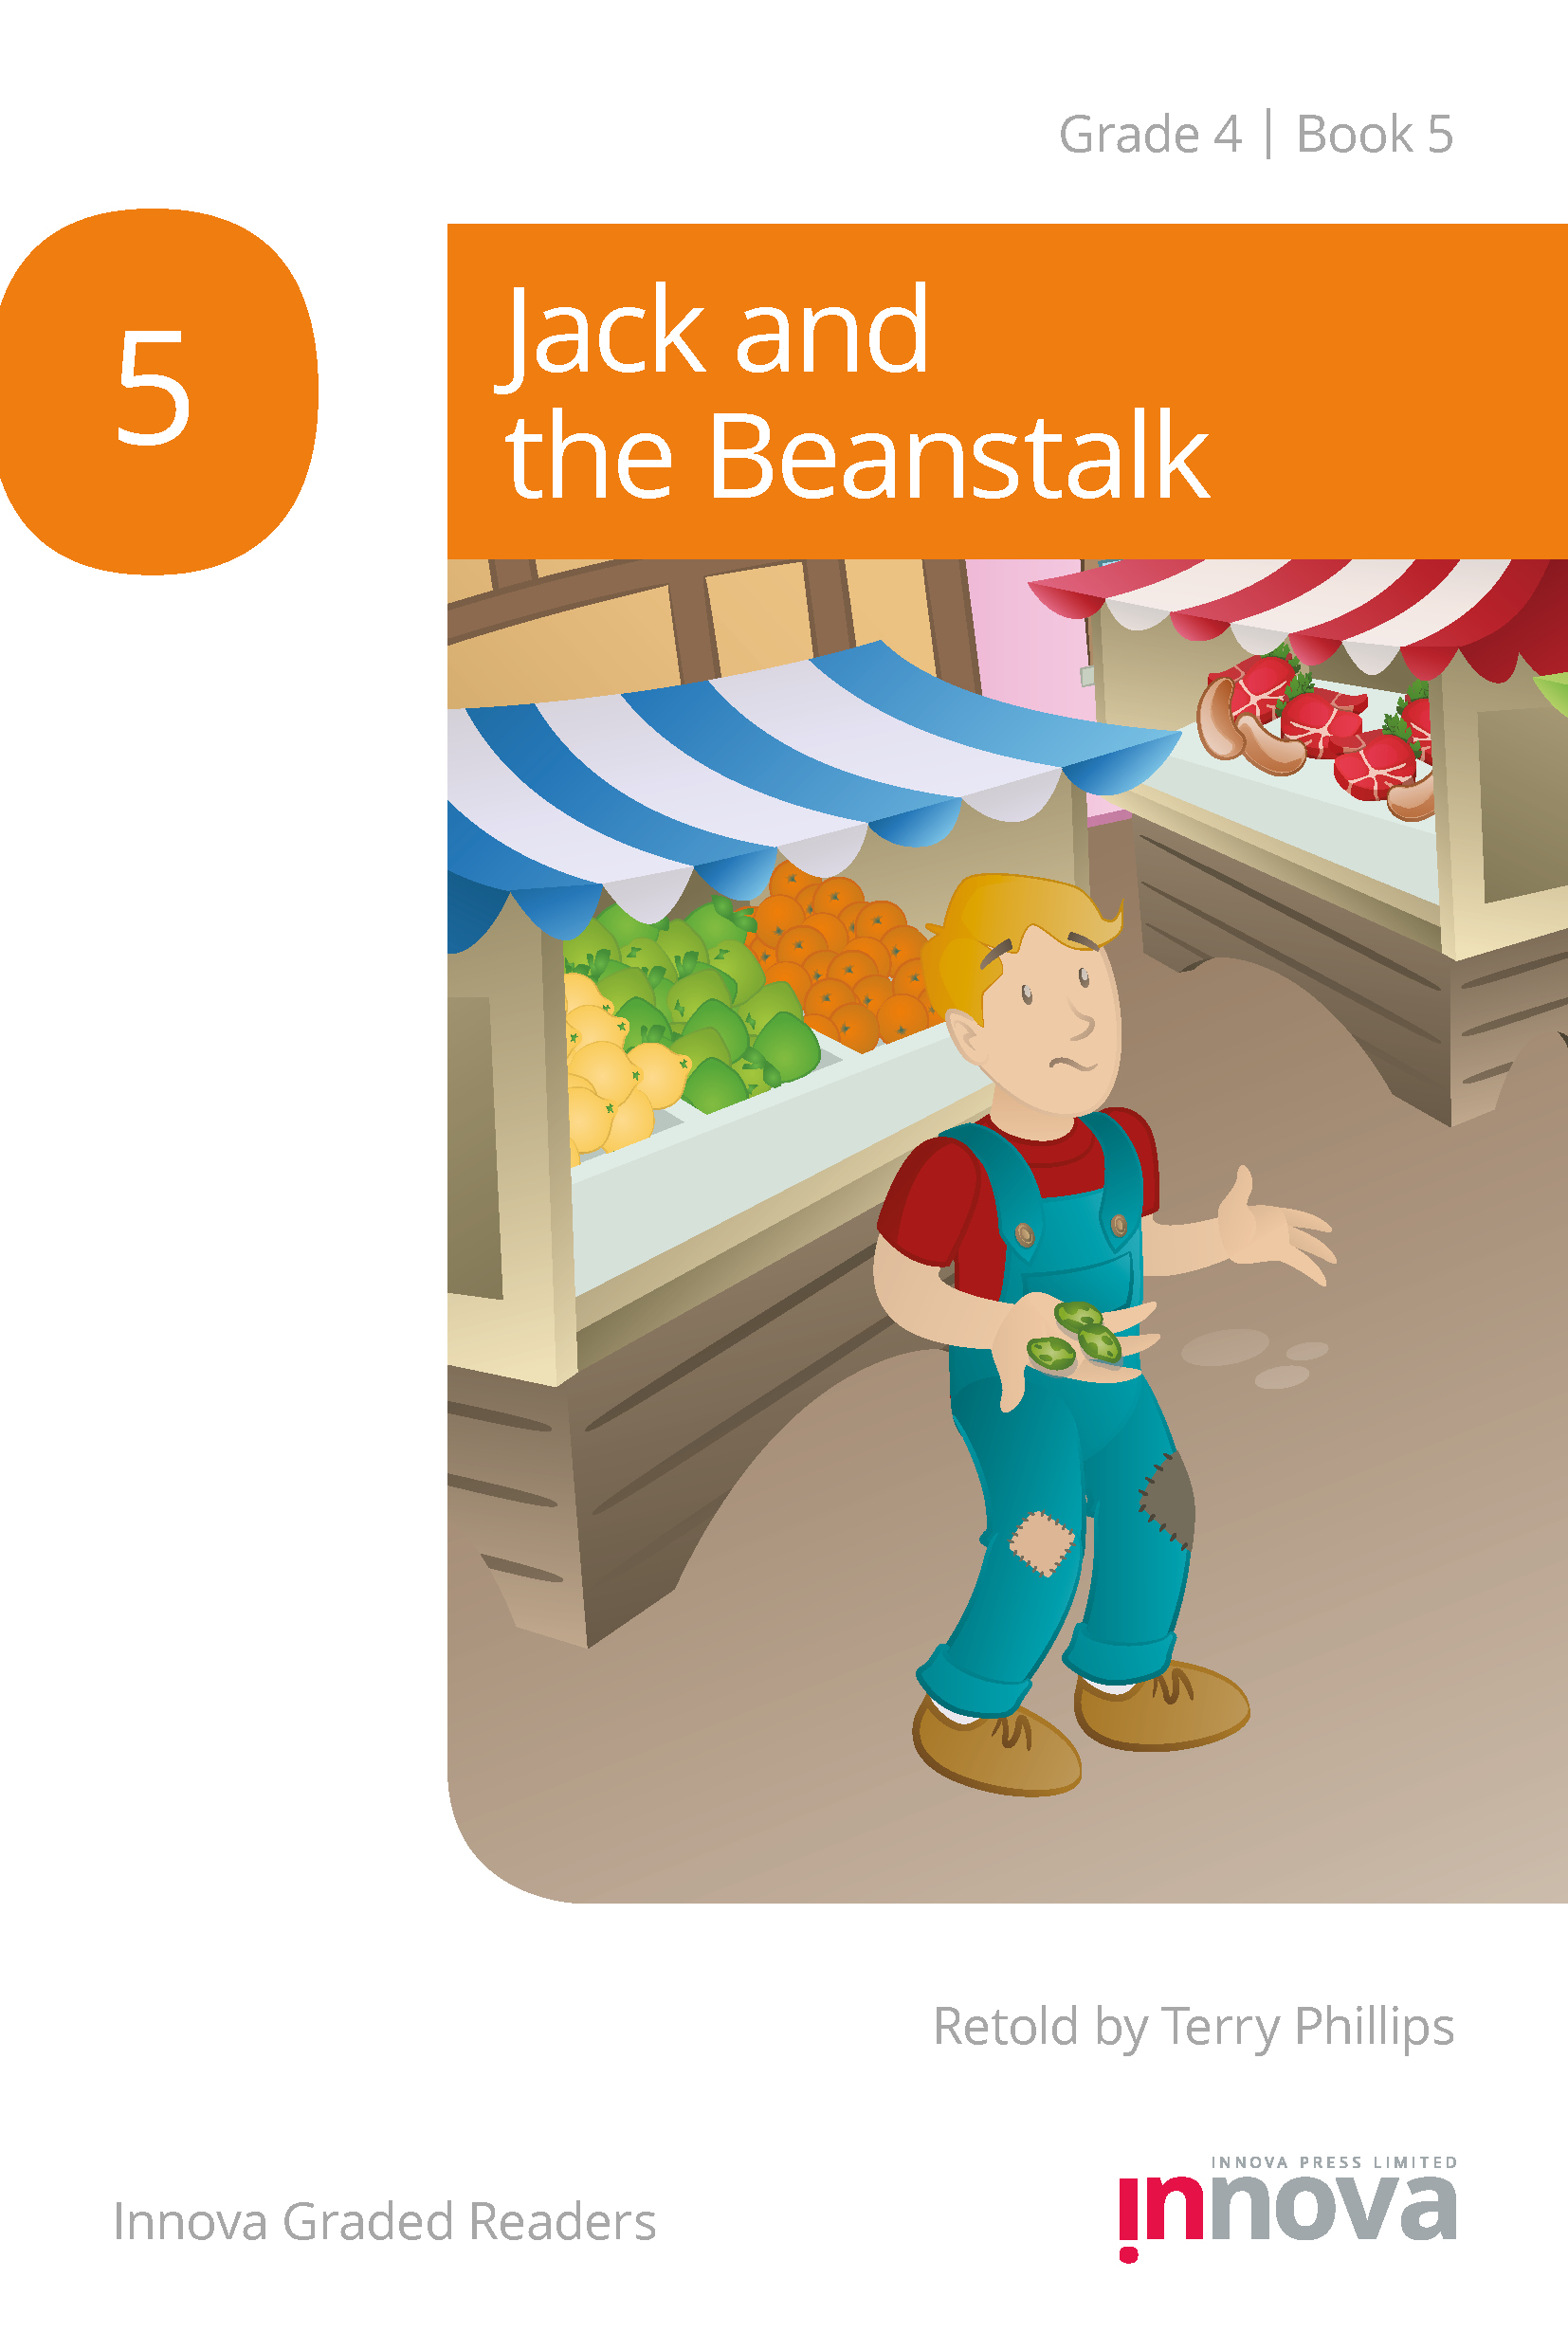 Innova Press Jack and the Beanstalk cover, a boy in dungarees stands in front of a food stall holding some beans